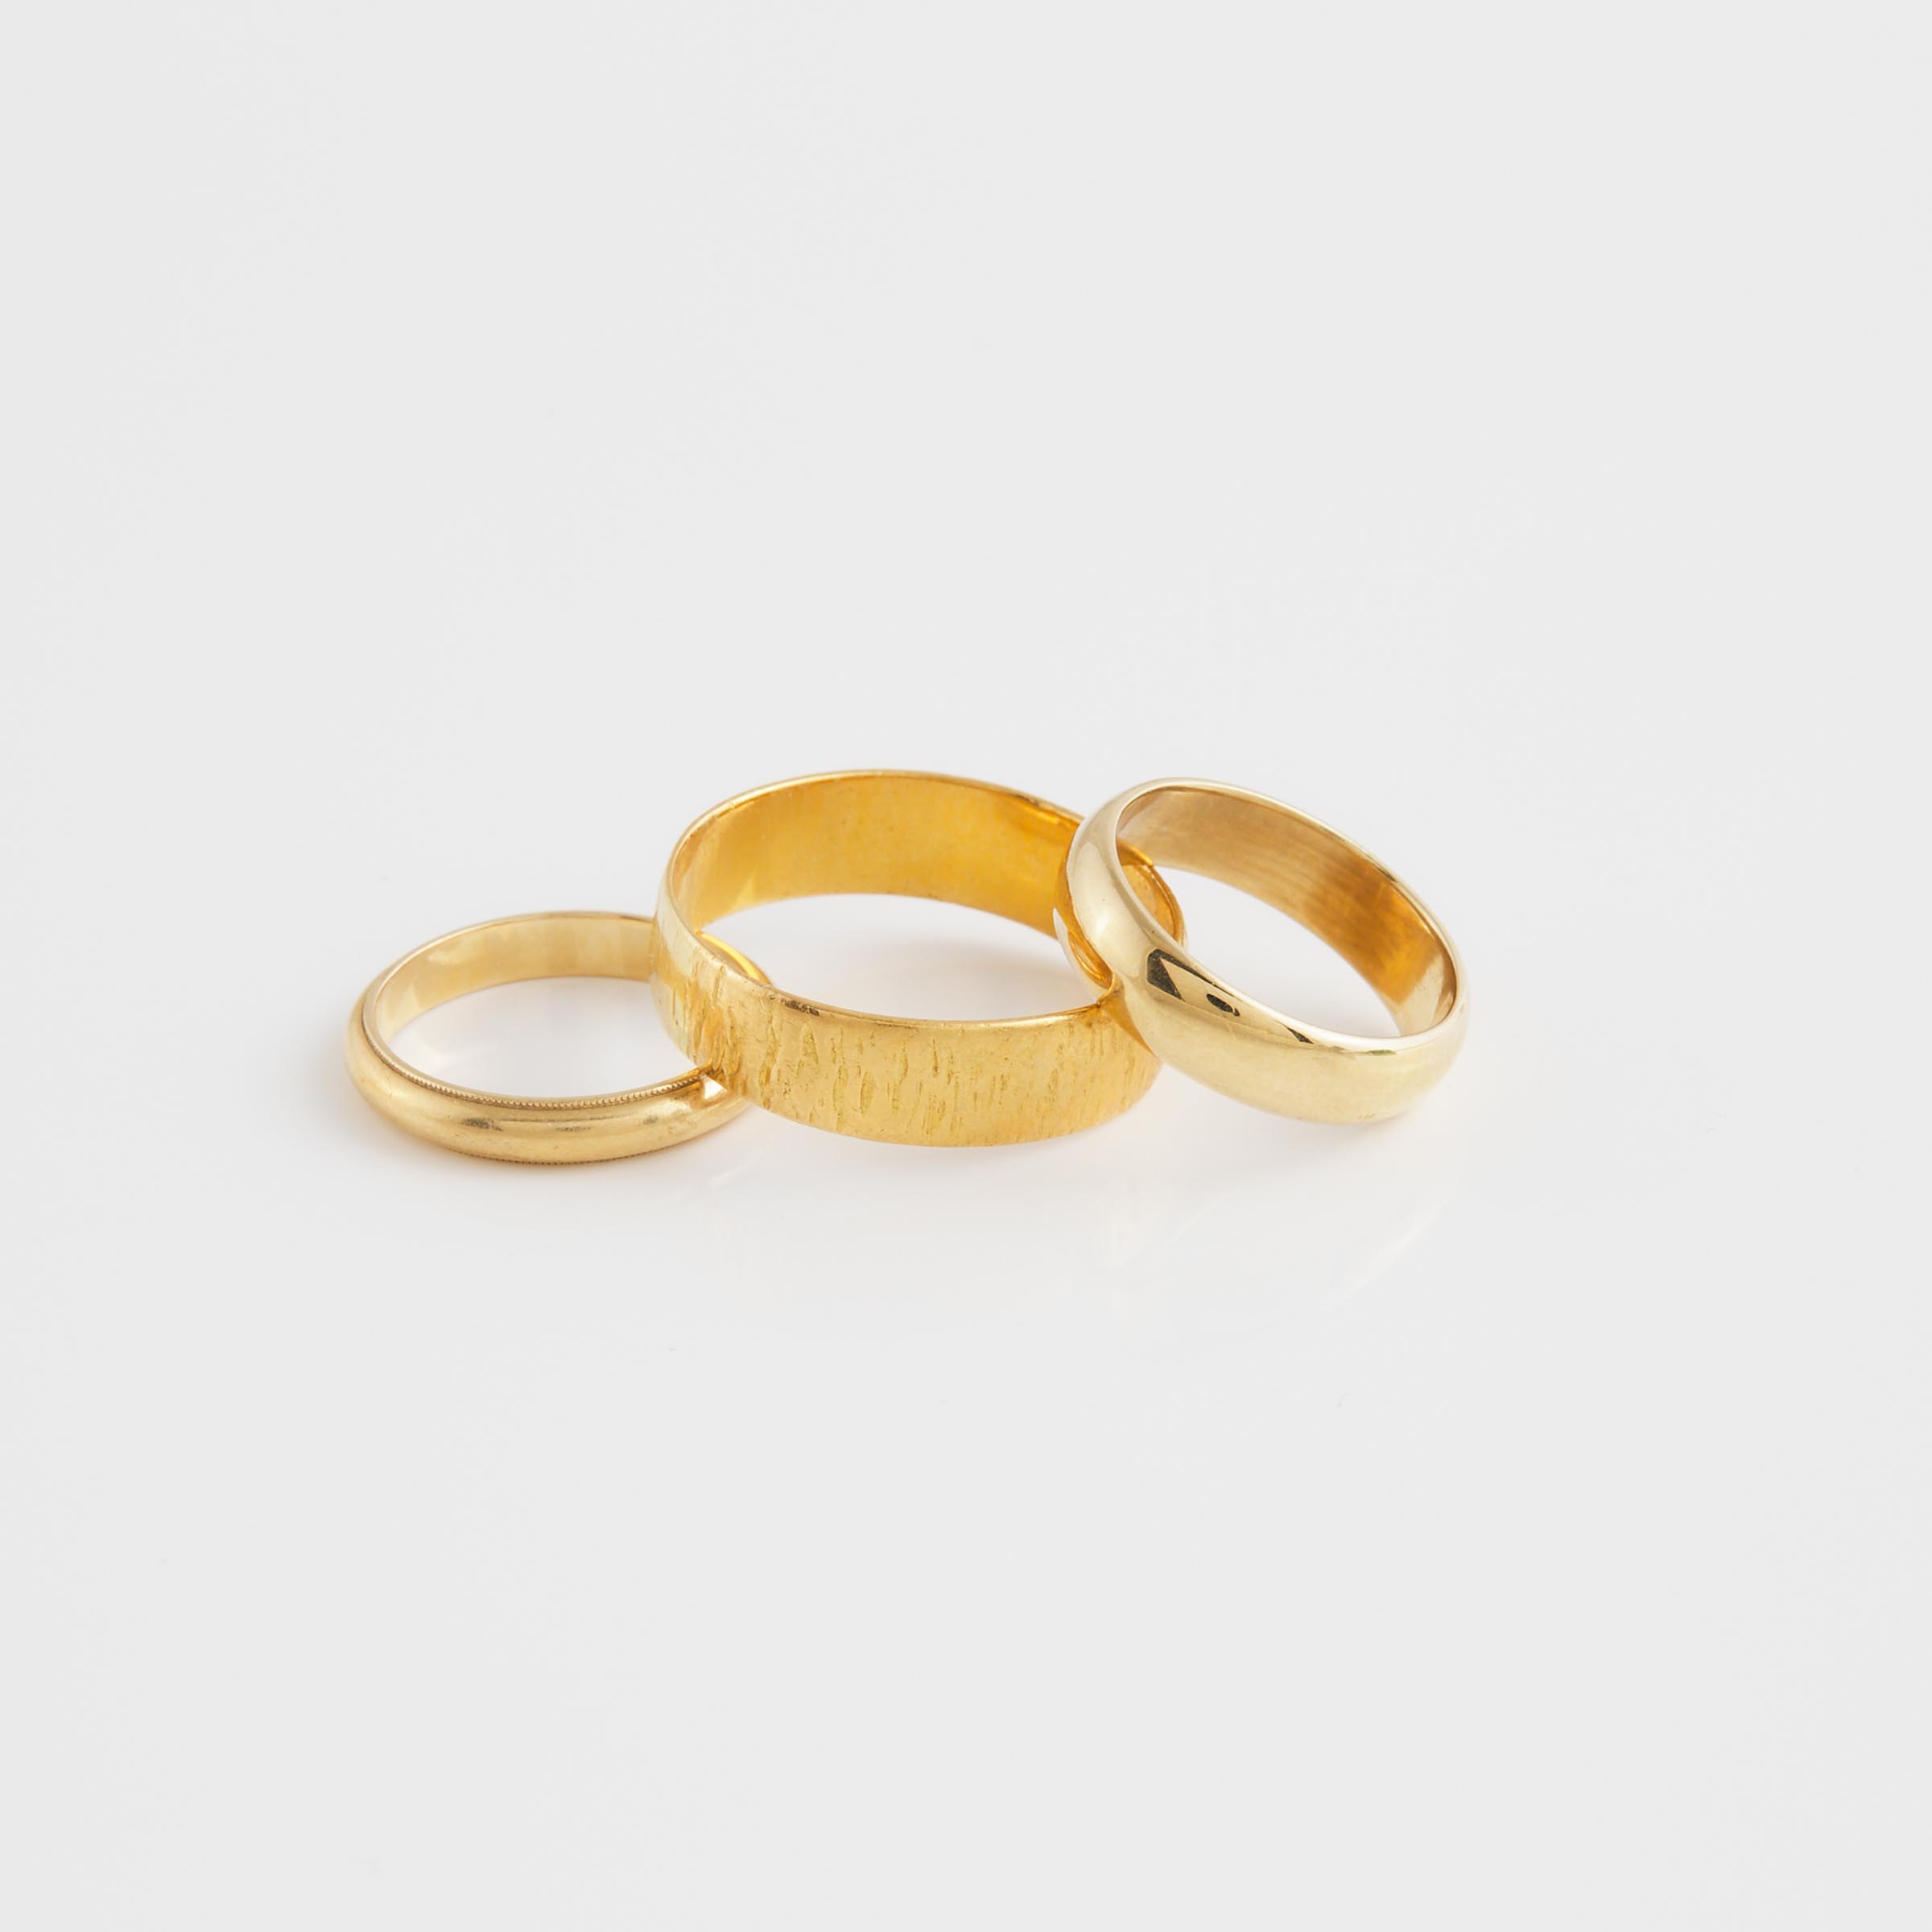 An English 22k And 2 x 14k Yellow Gold Bands 